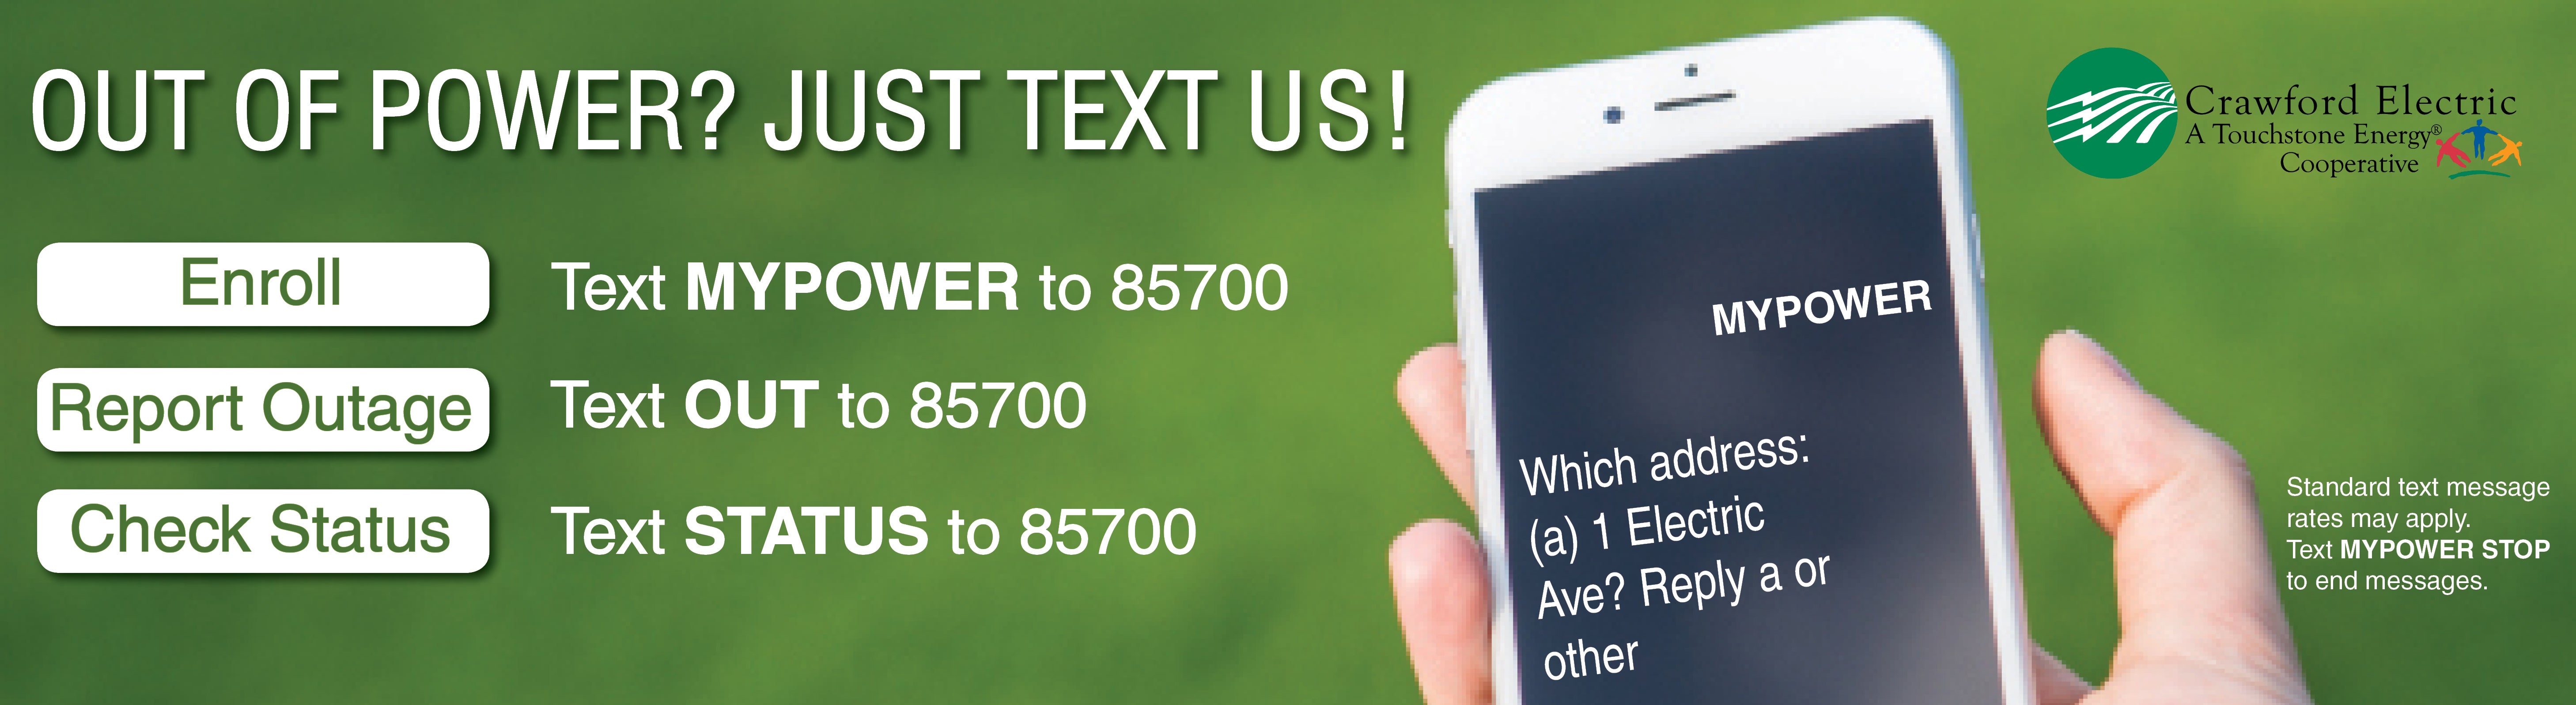 Out of Power? Text us